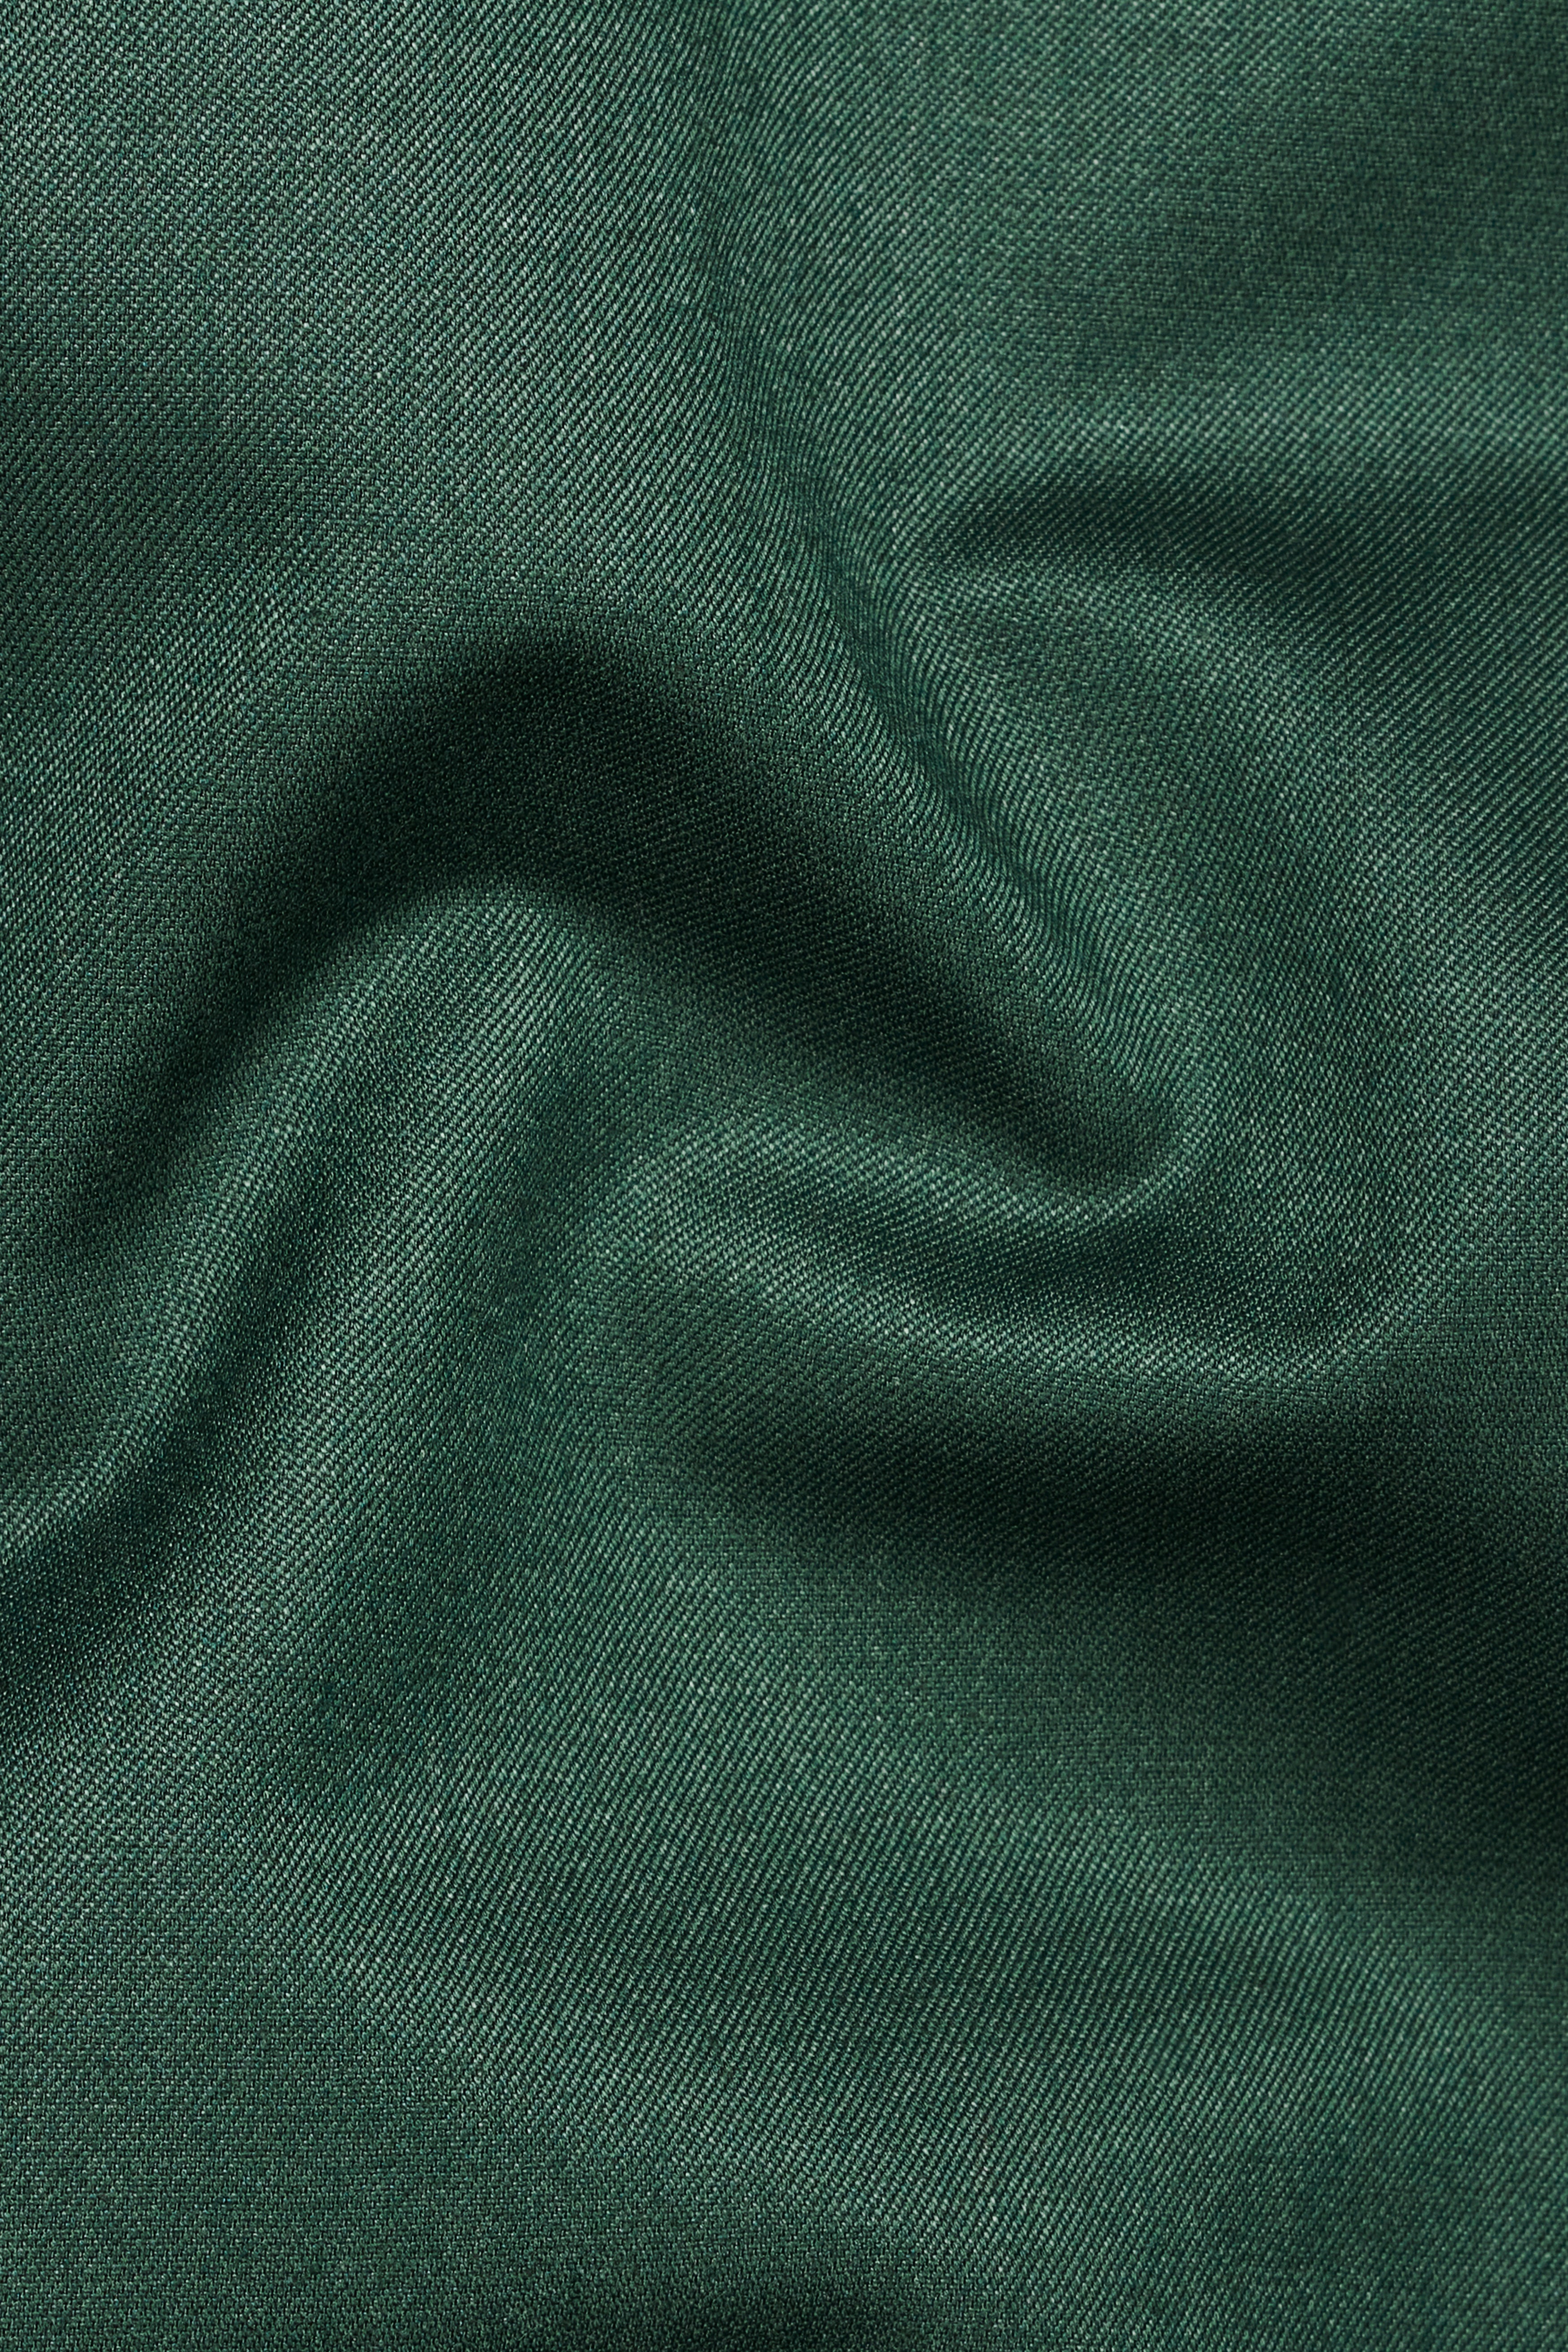 Everglade Green Wool Rich Single Breasted Stretchable traveler Blazer BL2710-SB-36, BL2710-SB-38, BL2710-SB-40, BL2710-SB-42, BL2710-SB-44, BL2710-SB-46, BL2710-SB-48, BL2710-SB-50, BL2710-SB-52, BL2710-SB-54, BL2710-SB-56, BL2710-SB-58, BL2710-SB-60